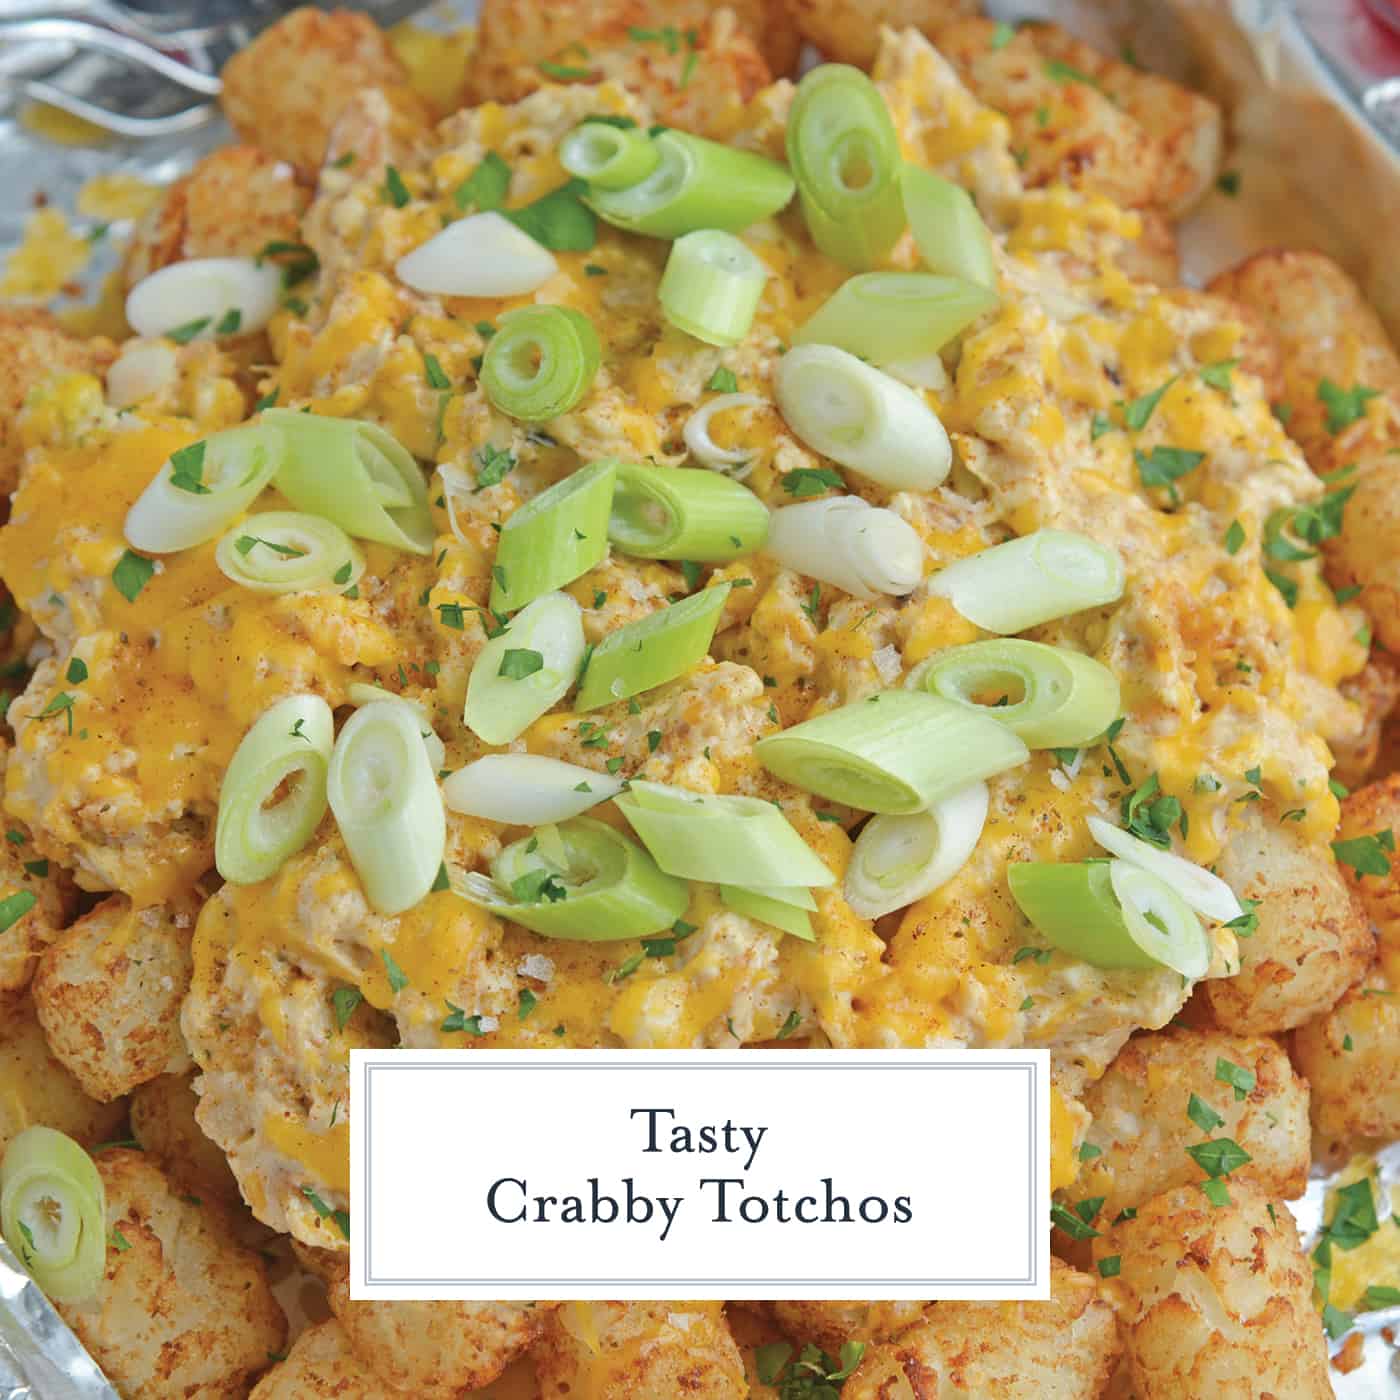 Crabby Totchos are crispy fried tater tots smothered in hot crab dip and topped with melty cheddar cheese. The perfect party appetizer! #tatertots #easyappetizerrecipes www.savoryexperiments.com 